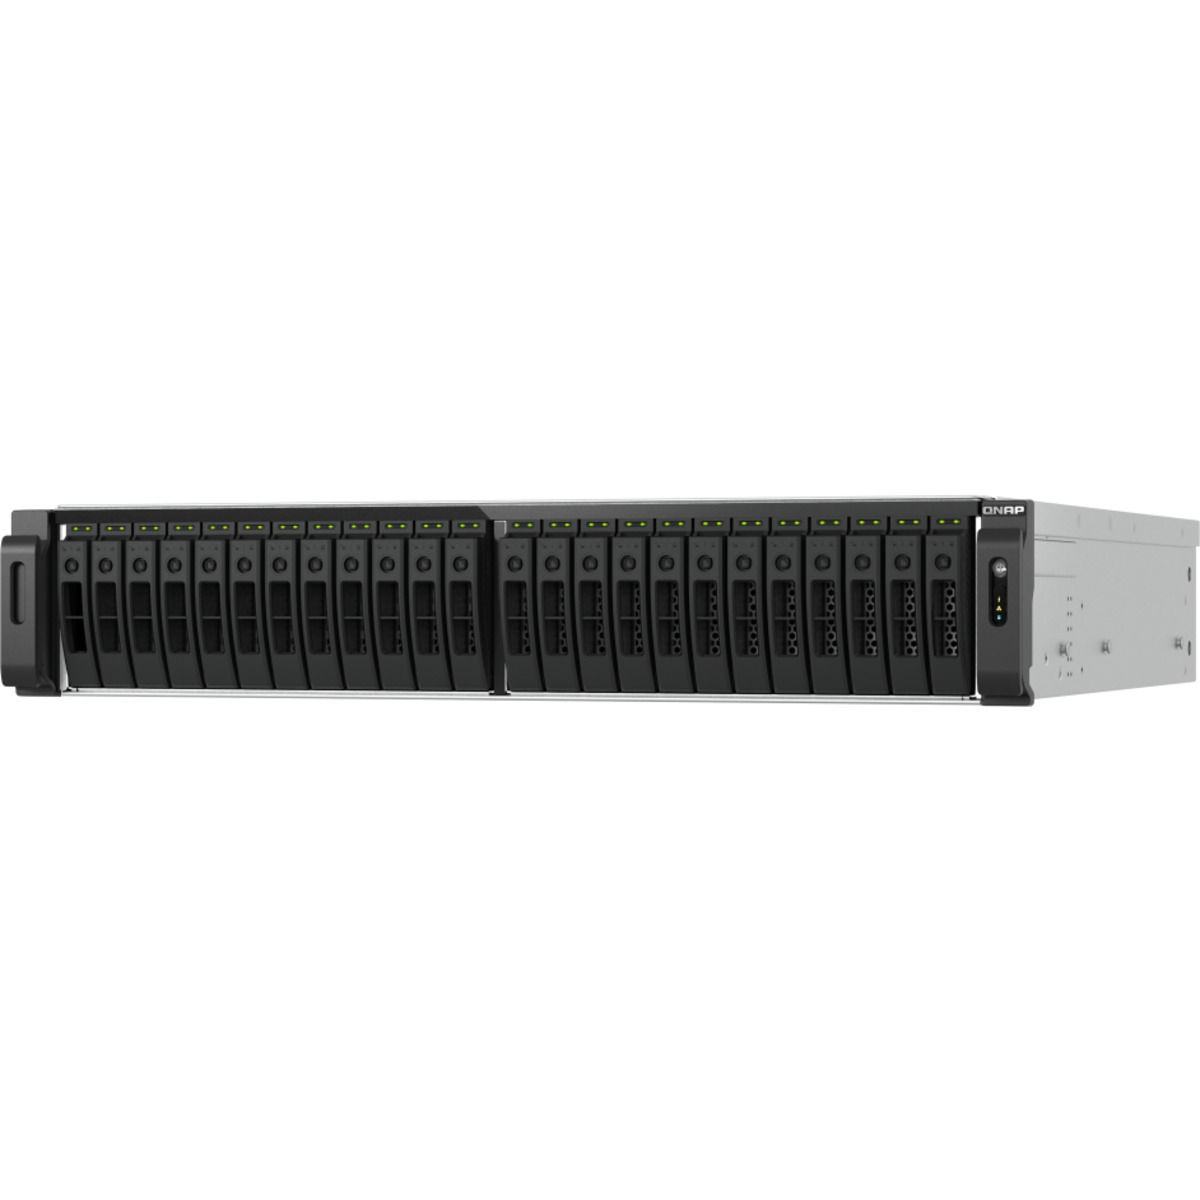 QNAP TS-h3077AFU Ryzen 7 All-Flash ZFS 116tb 30-Bay RackMount Large Business / Enterprise NAS - Network Attached Storage Device 29x4tb Samsung 870 QVO MZ-77Q4T0 2.5 560/530MB/s SATA 6Gb/s SSD CONSUMER Class Drives Installed - Burn-In Tested TS-h3077AFU Ryzen 7 All-Flash ZFS